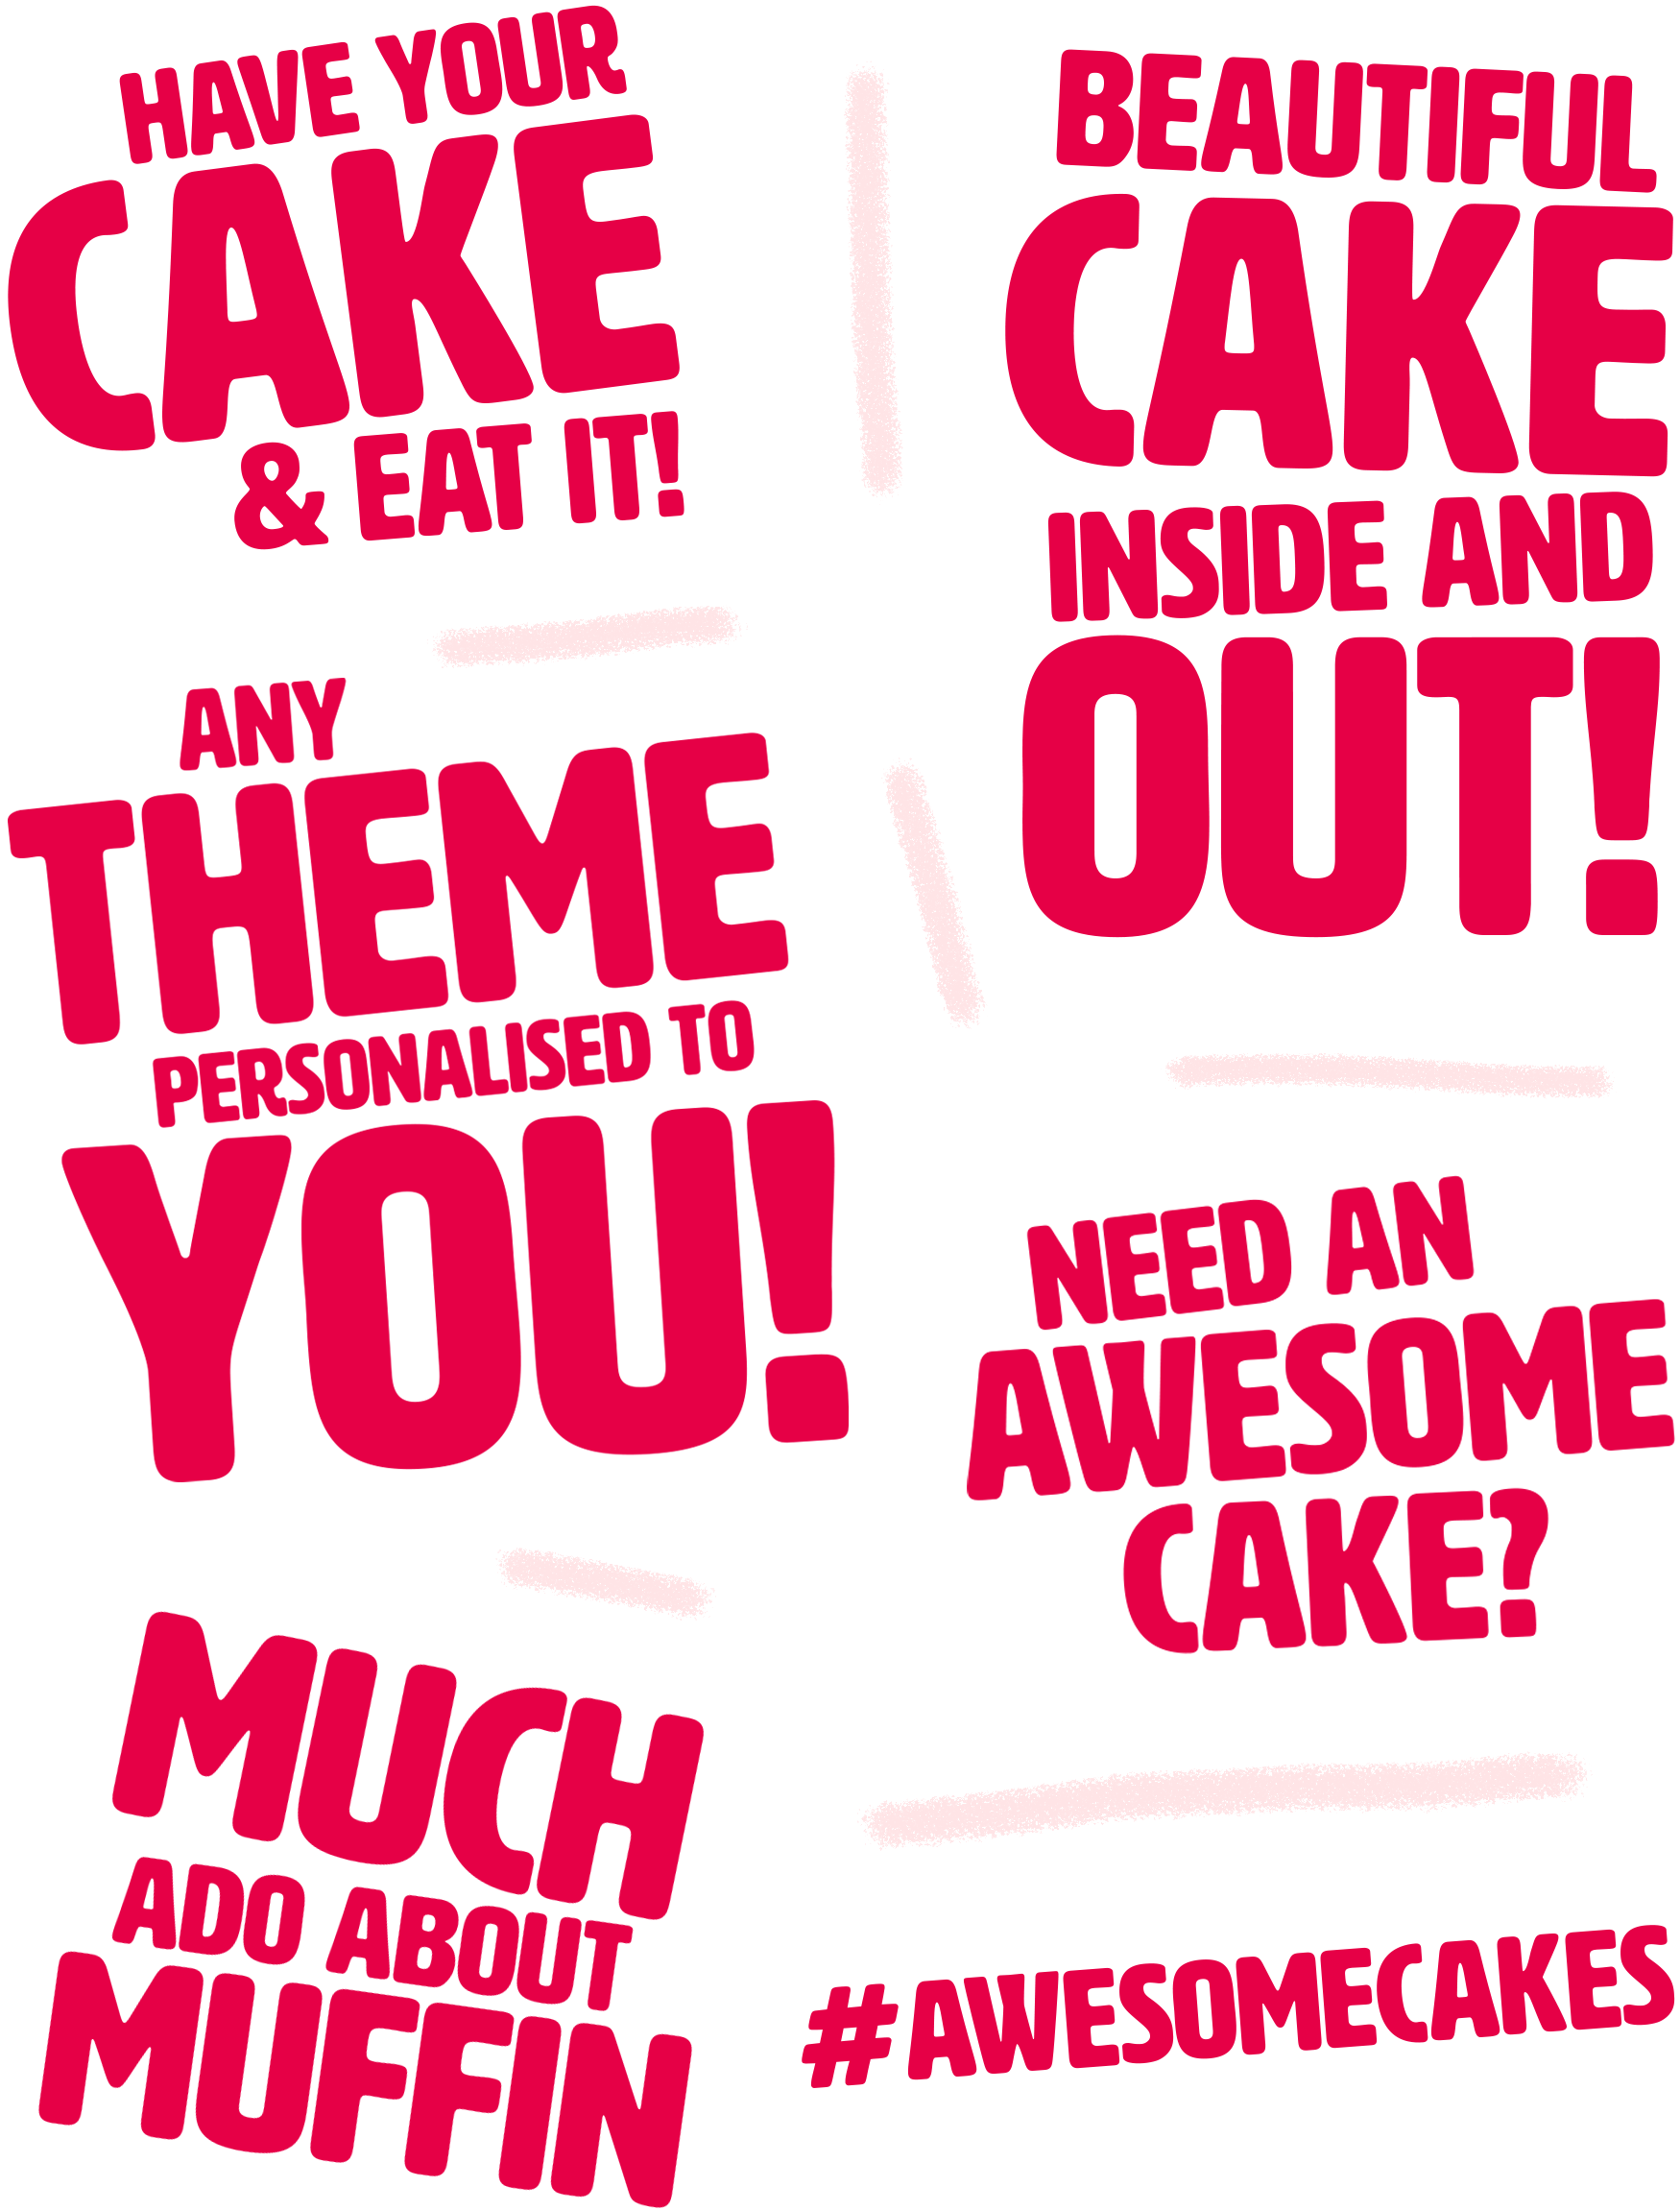 we make awesome cakes brand logo graphic design branding cardiff cake marketing campaign type typography